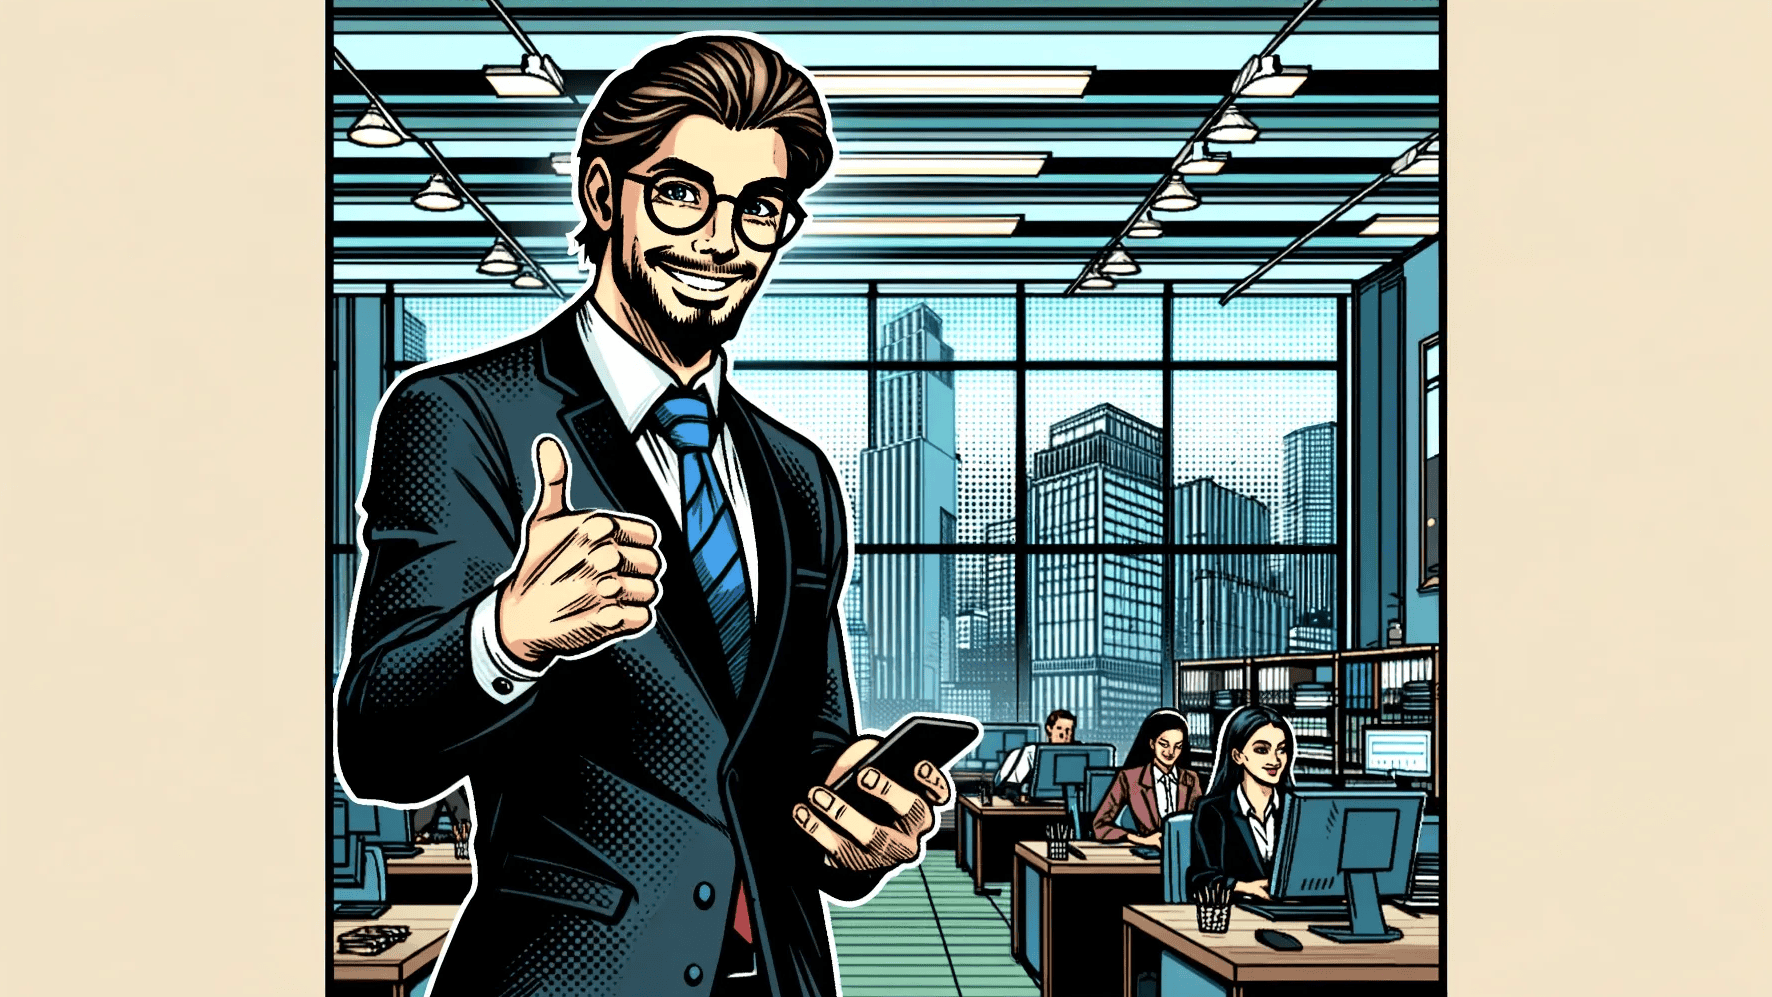 Entrepreneur giving a thumbs-up in a simplified office, pleased with software, in a soft-colored, comic book-style illustration.